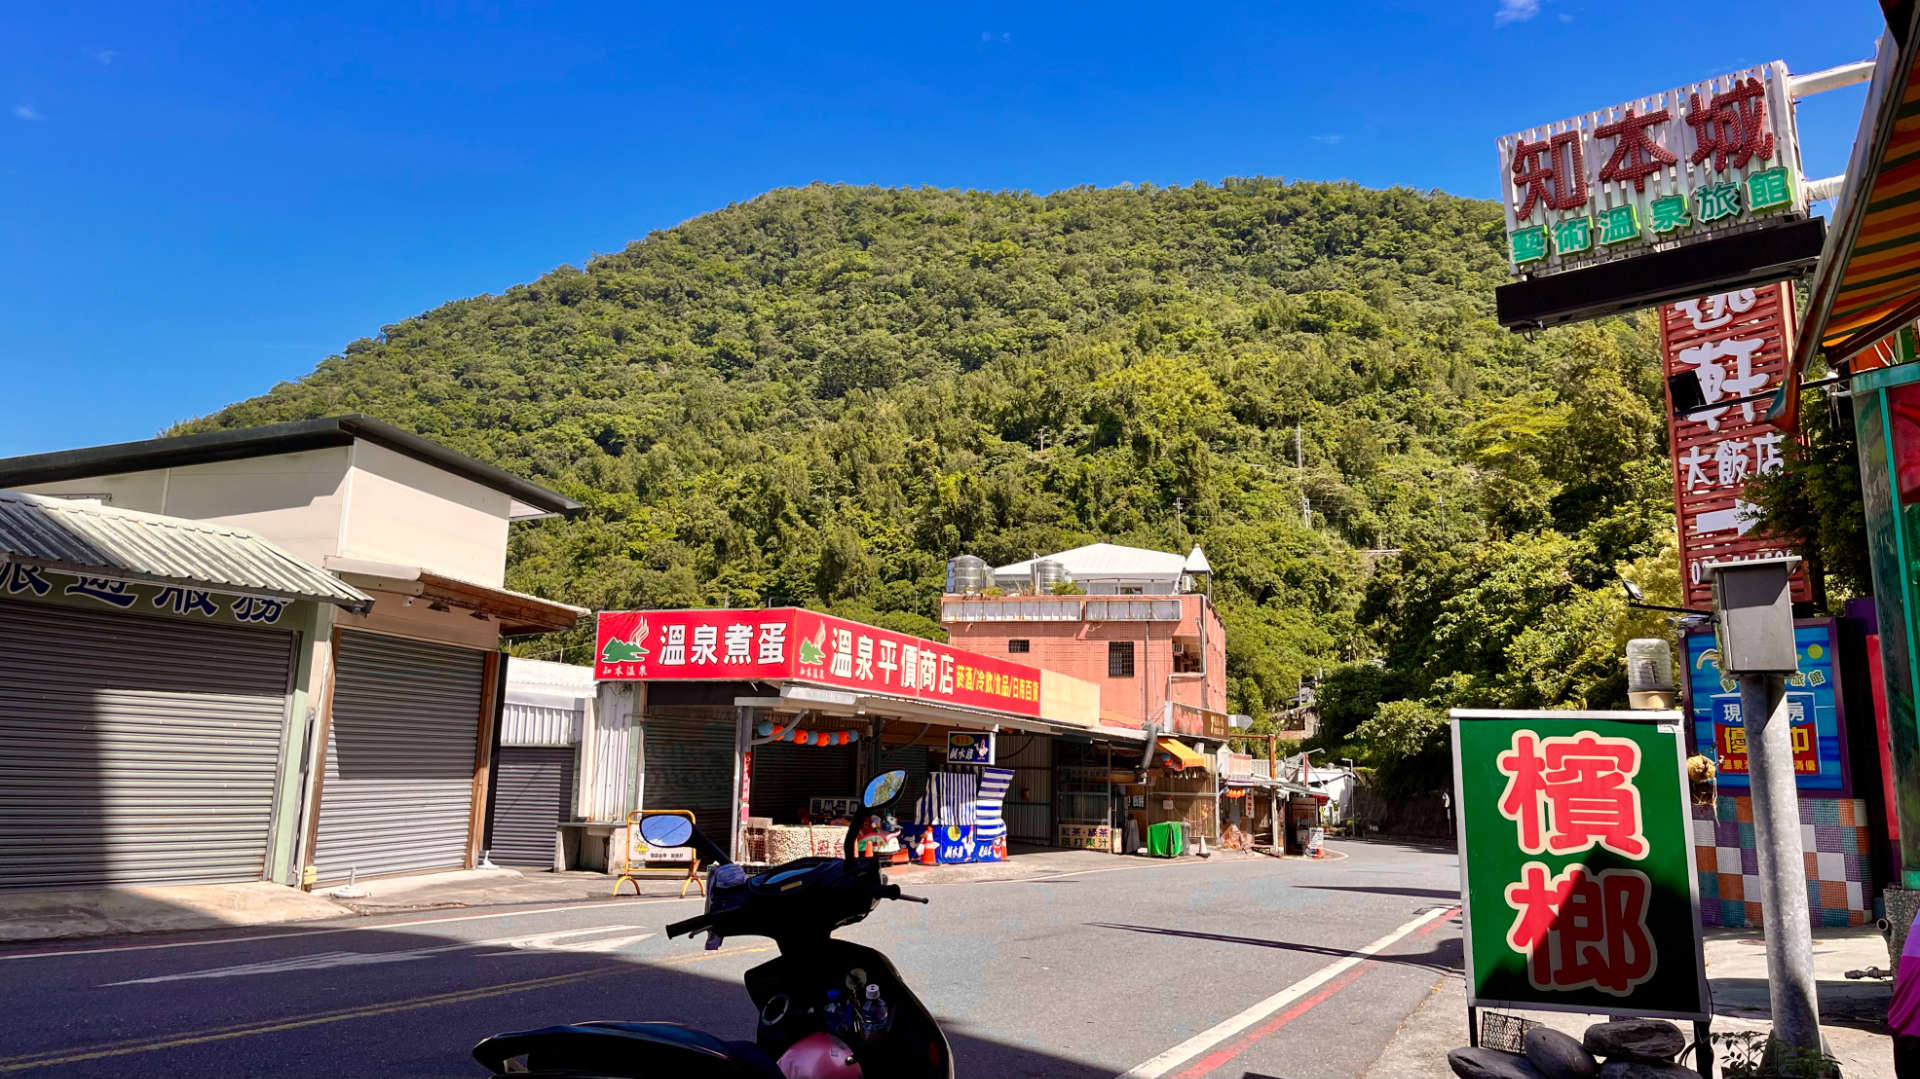 A scooter in the foreground and a quiet streetscape behind, with mountains beyond that. There are no people, and three or four visible shops that look empty.